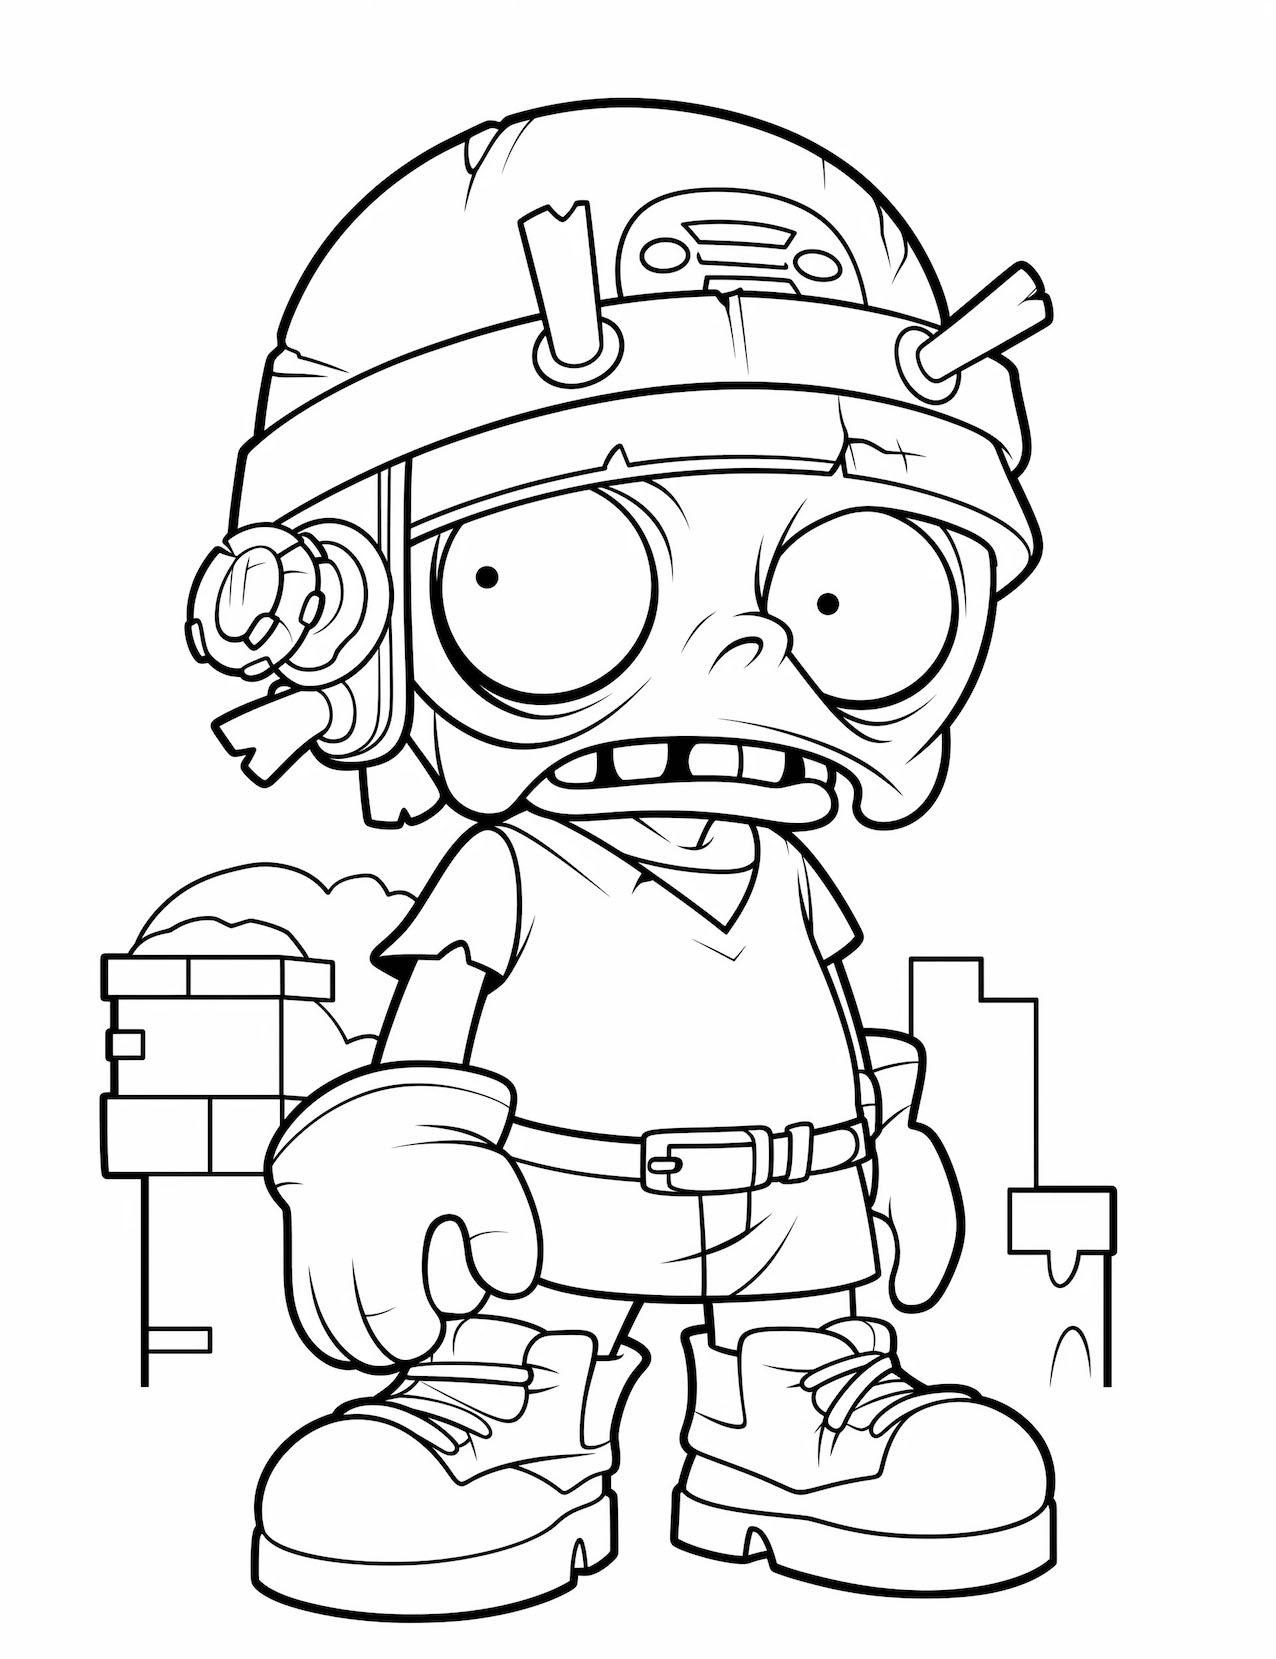 Captivating zombie coloring pages for kids and adults